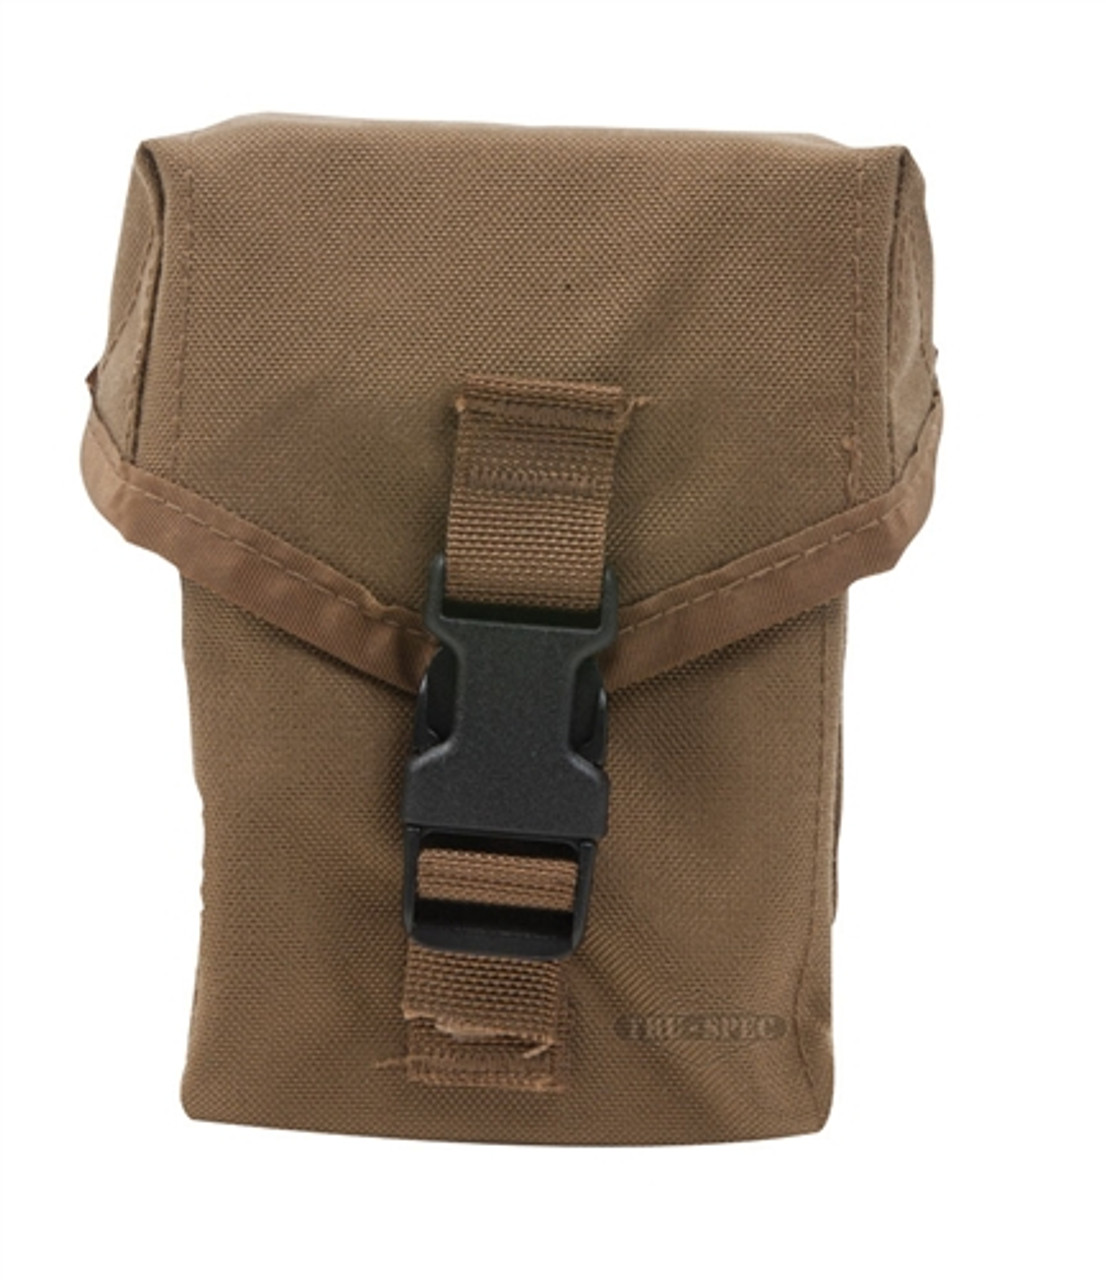 MOLLE compatible SAQ Pouch. ACU camouflage from Hessen Tactical